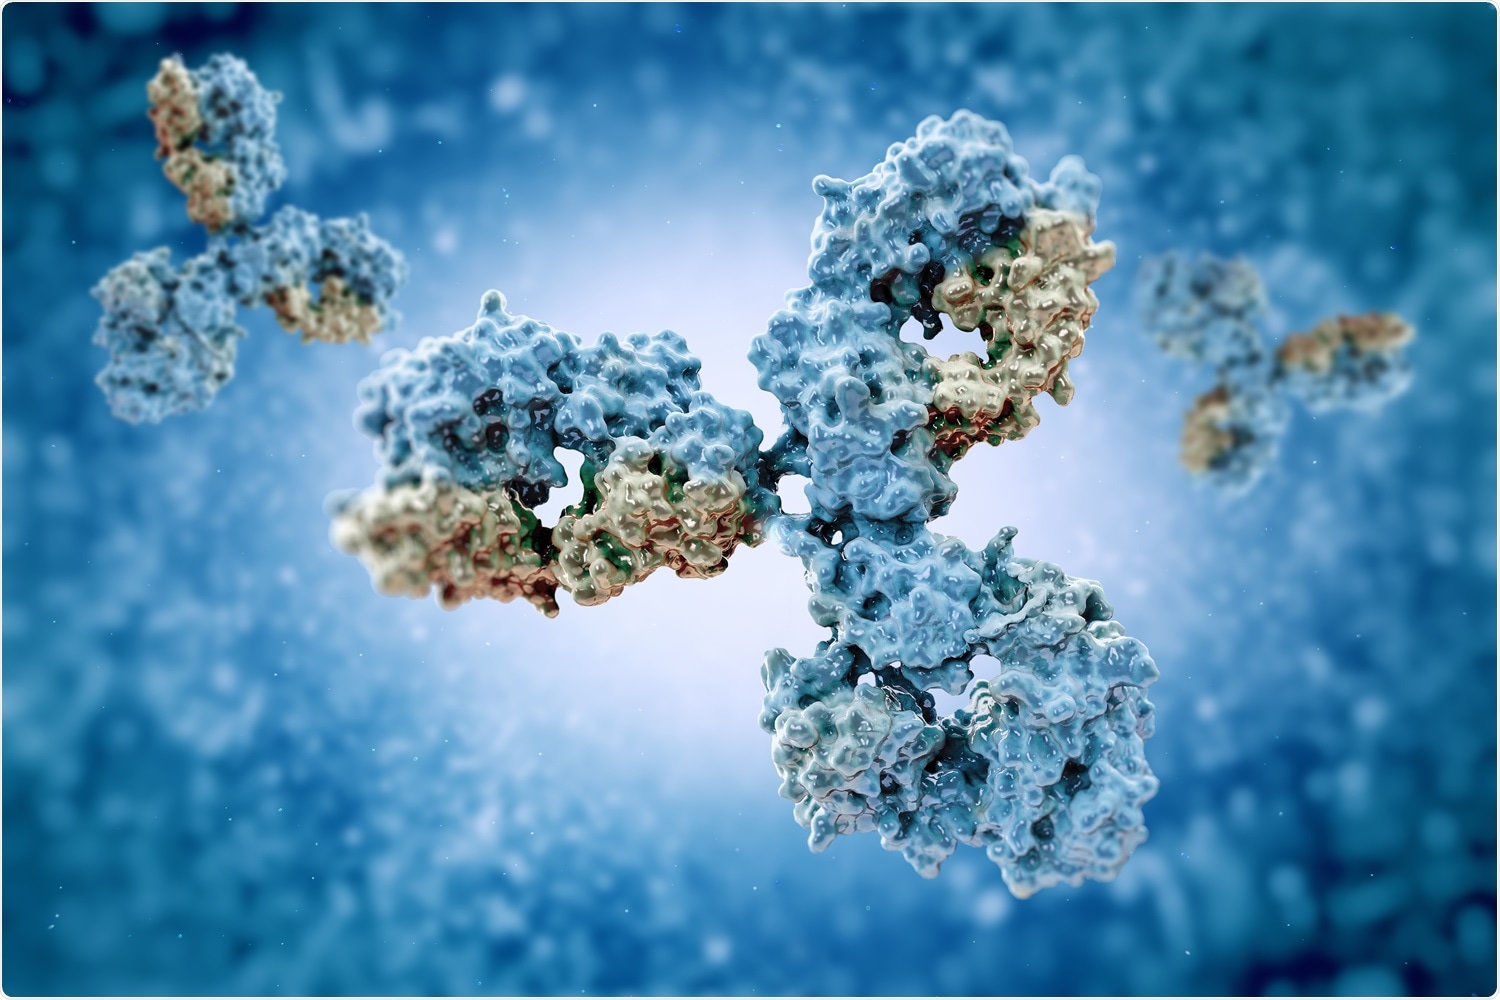 Study: Antibody responses to BNT162b2 mRNA COVID-19 vaccine in 2,015 healthcare workers in a single tertiary referral hospital in Japan. Image Credit: vitstudio / Shutterstock